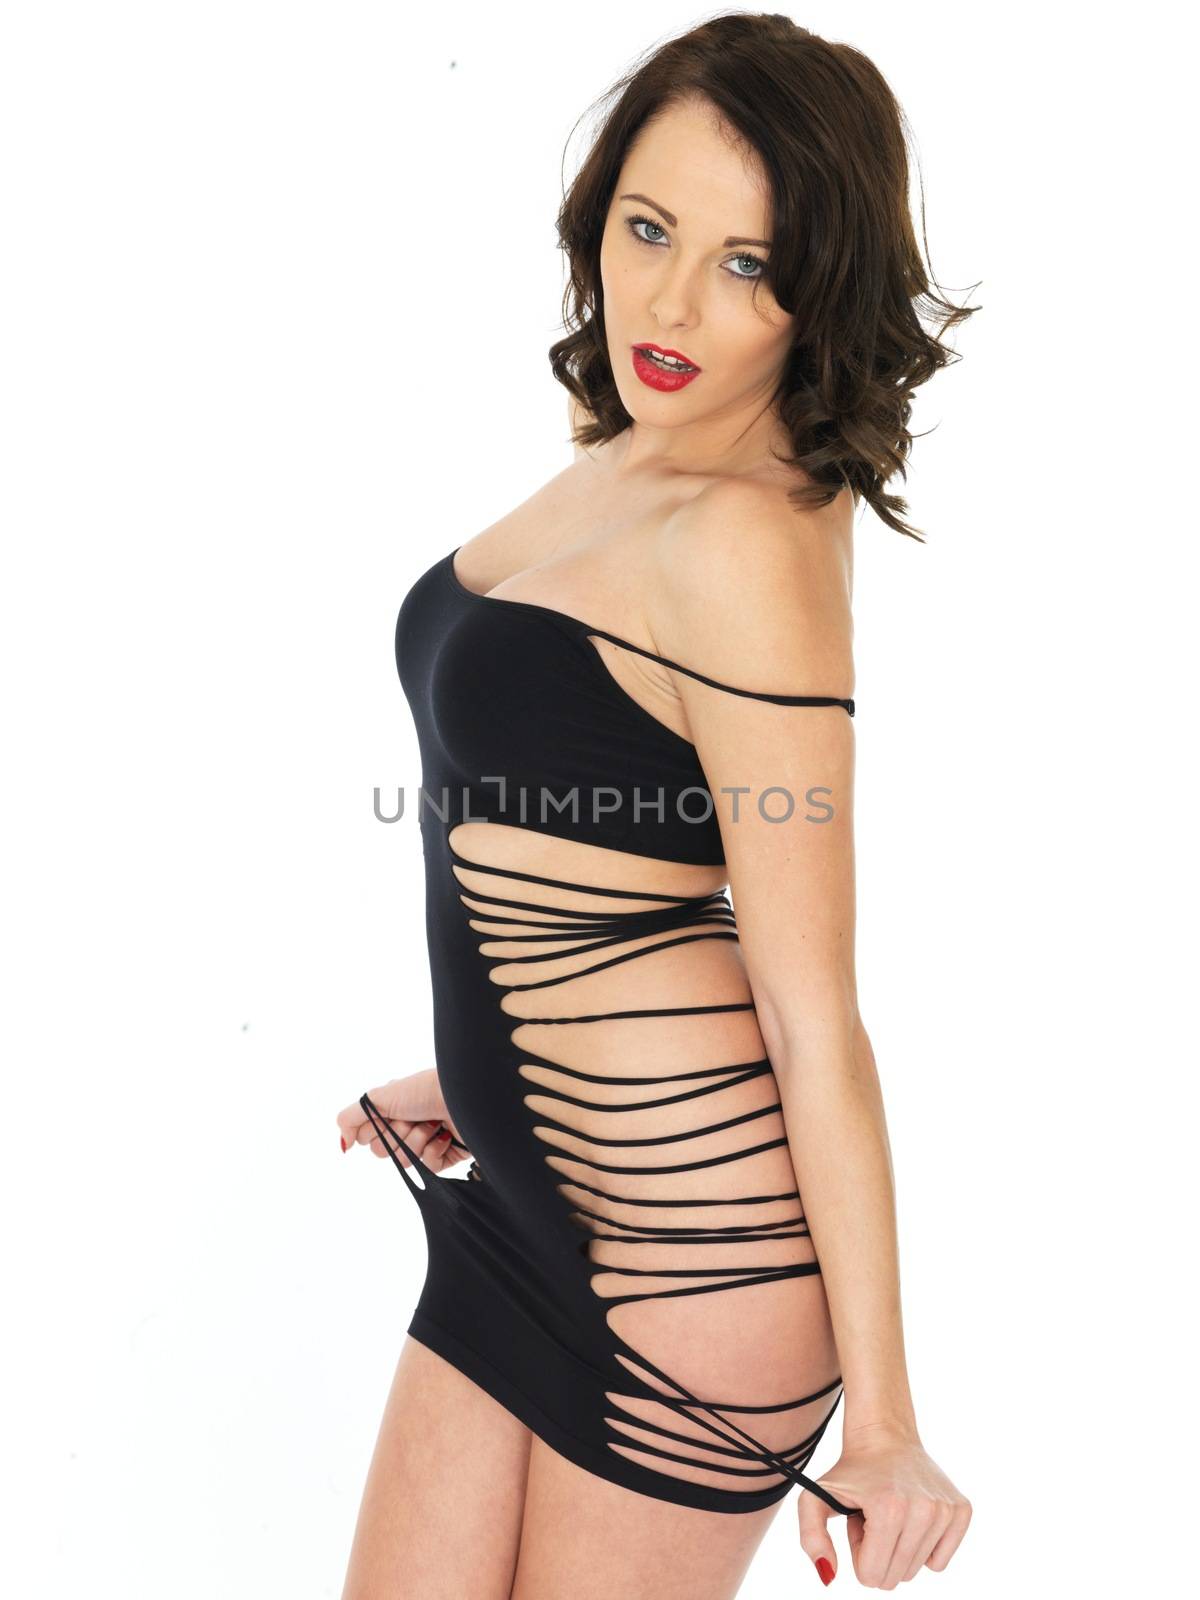 Sexy Young Pin Up Model Revealing Black Dress by Whiteboxmedia